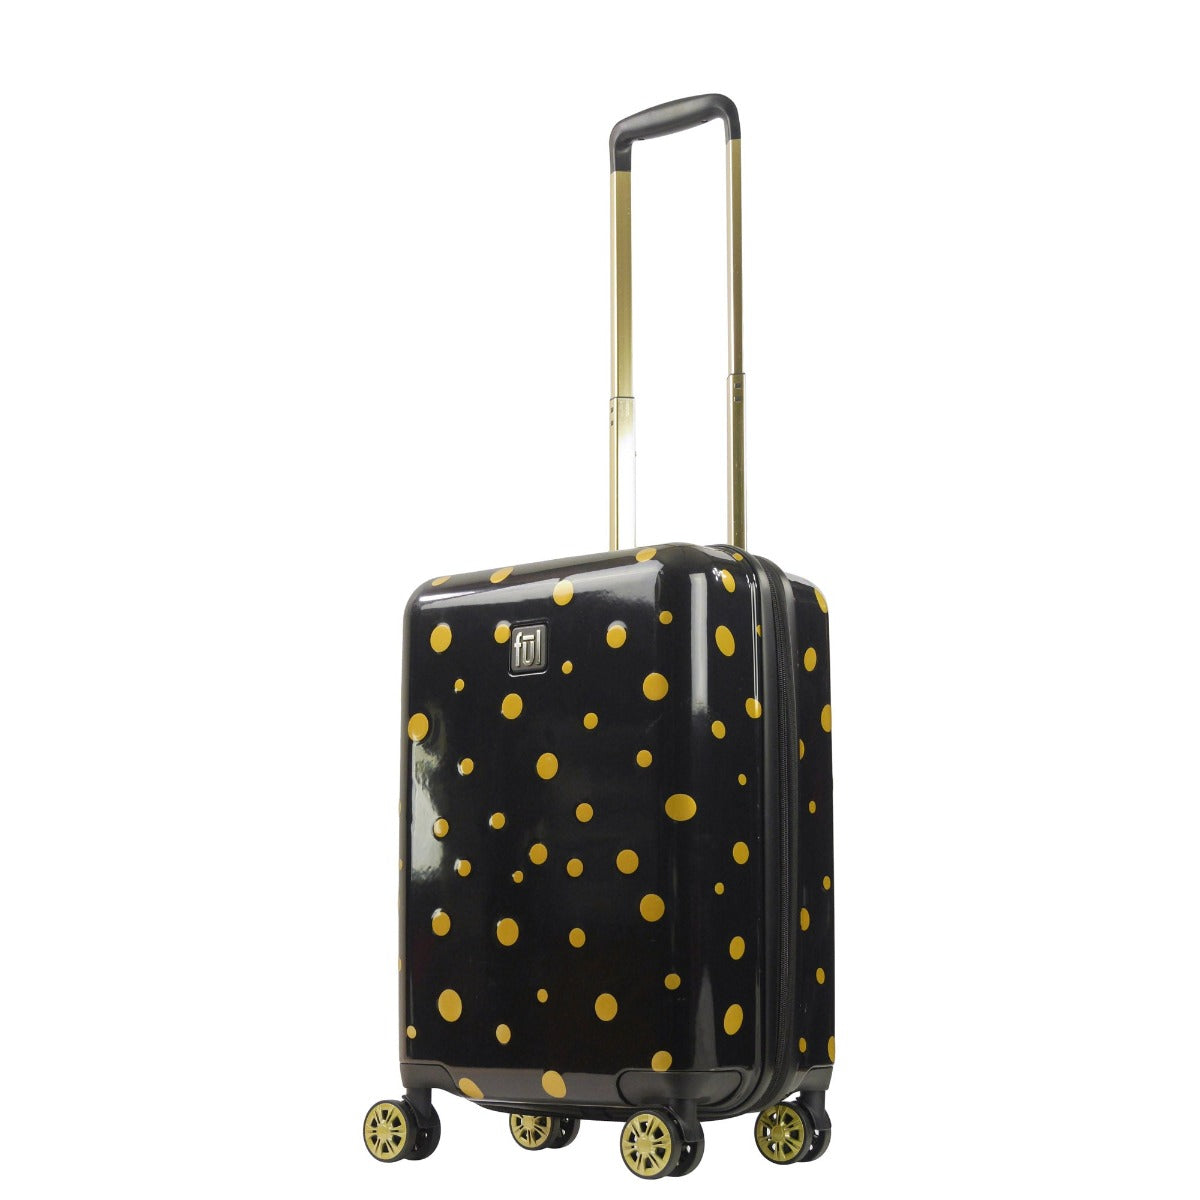 Ful Impulse Mixed Dots Hardside Spinner 22" Luggage carry-on black gold